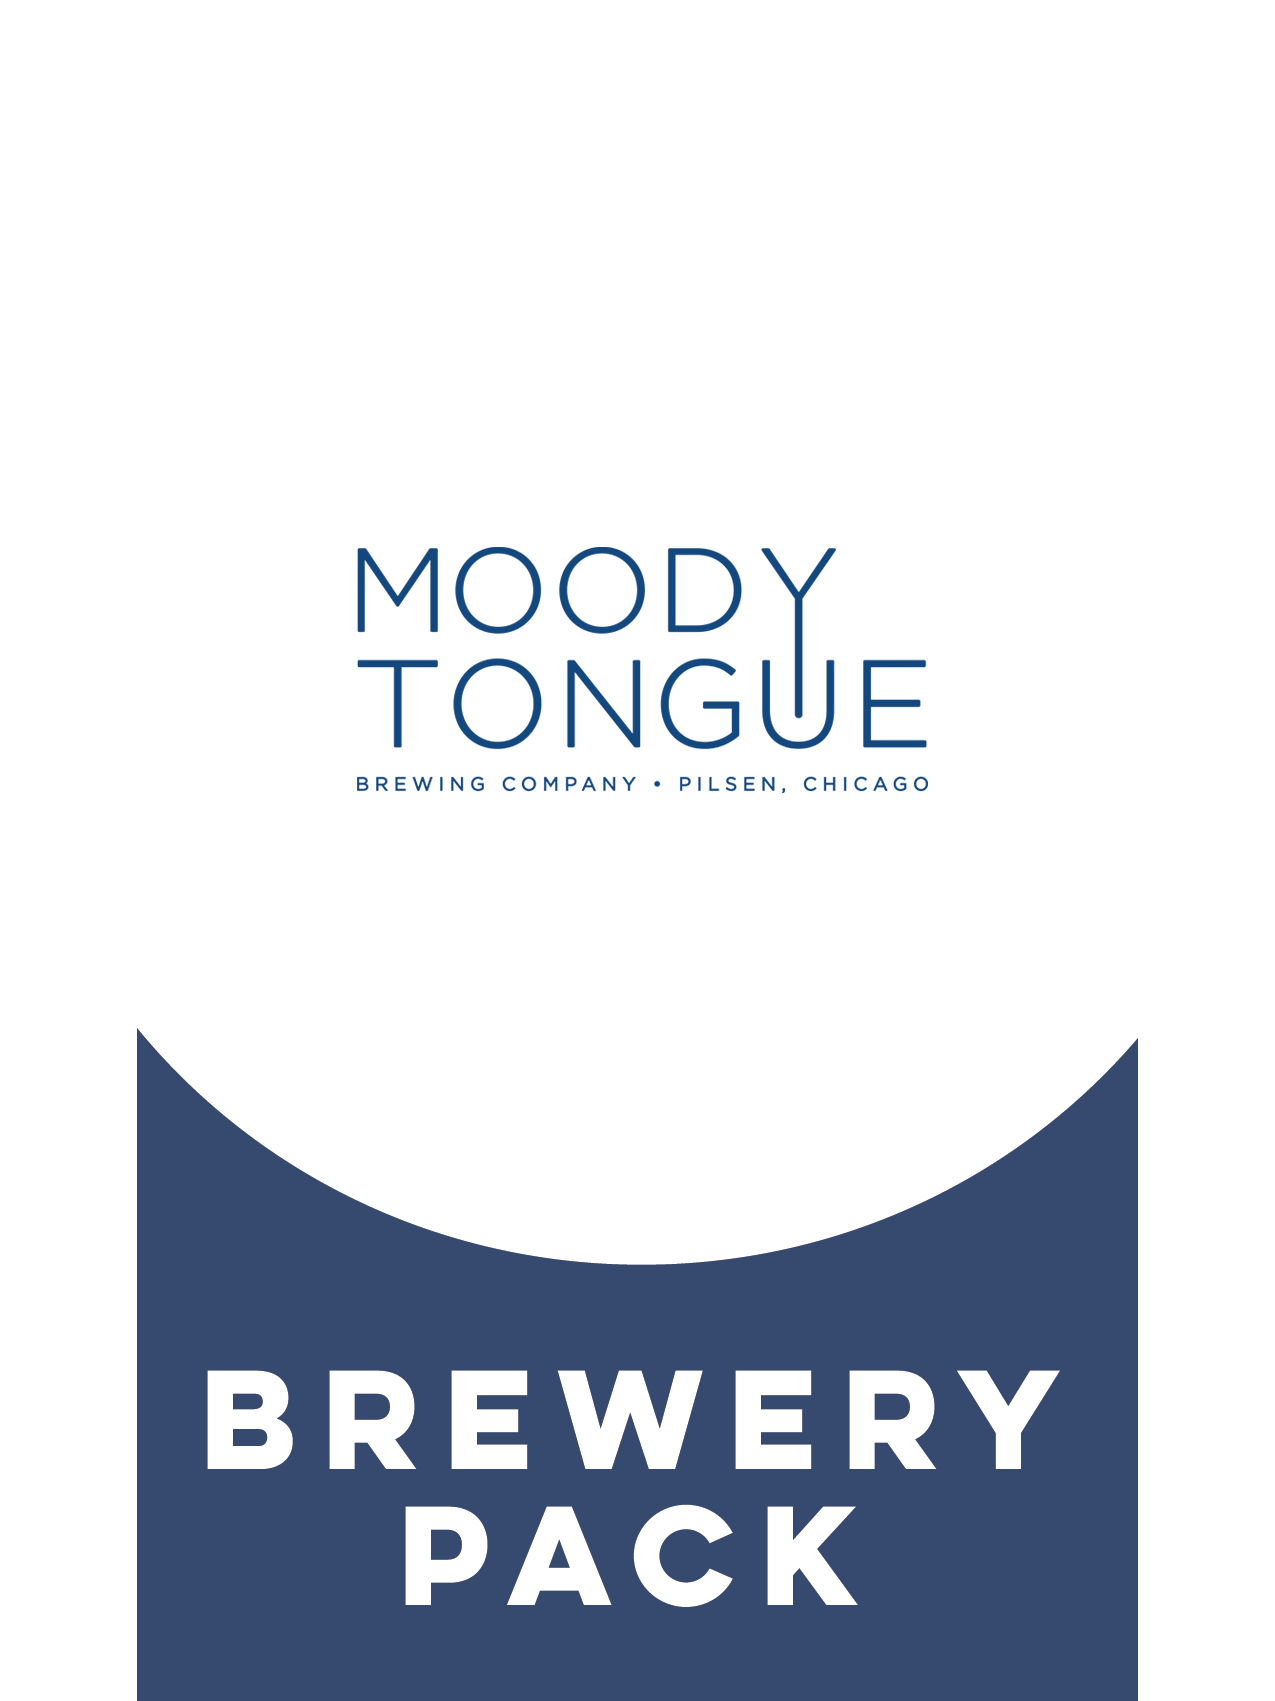 -Moody Tongue- Moody Tongue Brewery Pack-Packs & Cases- Only @ Beer Republic - The best online beer store for American & Canadian craft beer - Buy beer online from the USA and Canada - Bier online kopen - Amerikaans bier kopen - Craft beer store - Craft beer kopen - Amerikanisch bier kaufen - Bier online kaufen - Acheter biere online - IPA - Stout - Porter - New England IPA - Hazy IPA - Imperial Stout - Barrel Aged - Barrel Aged Imperial Stout - Brown - Dark beer - Blond - Blonde - Pilsner - Lager - Wheat -